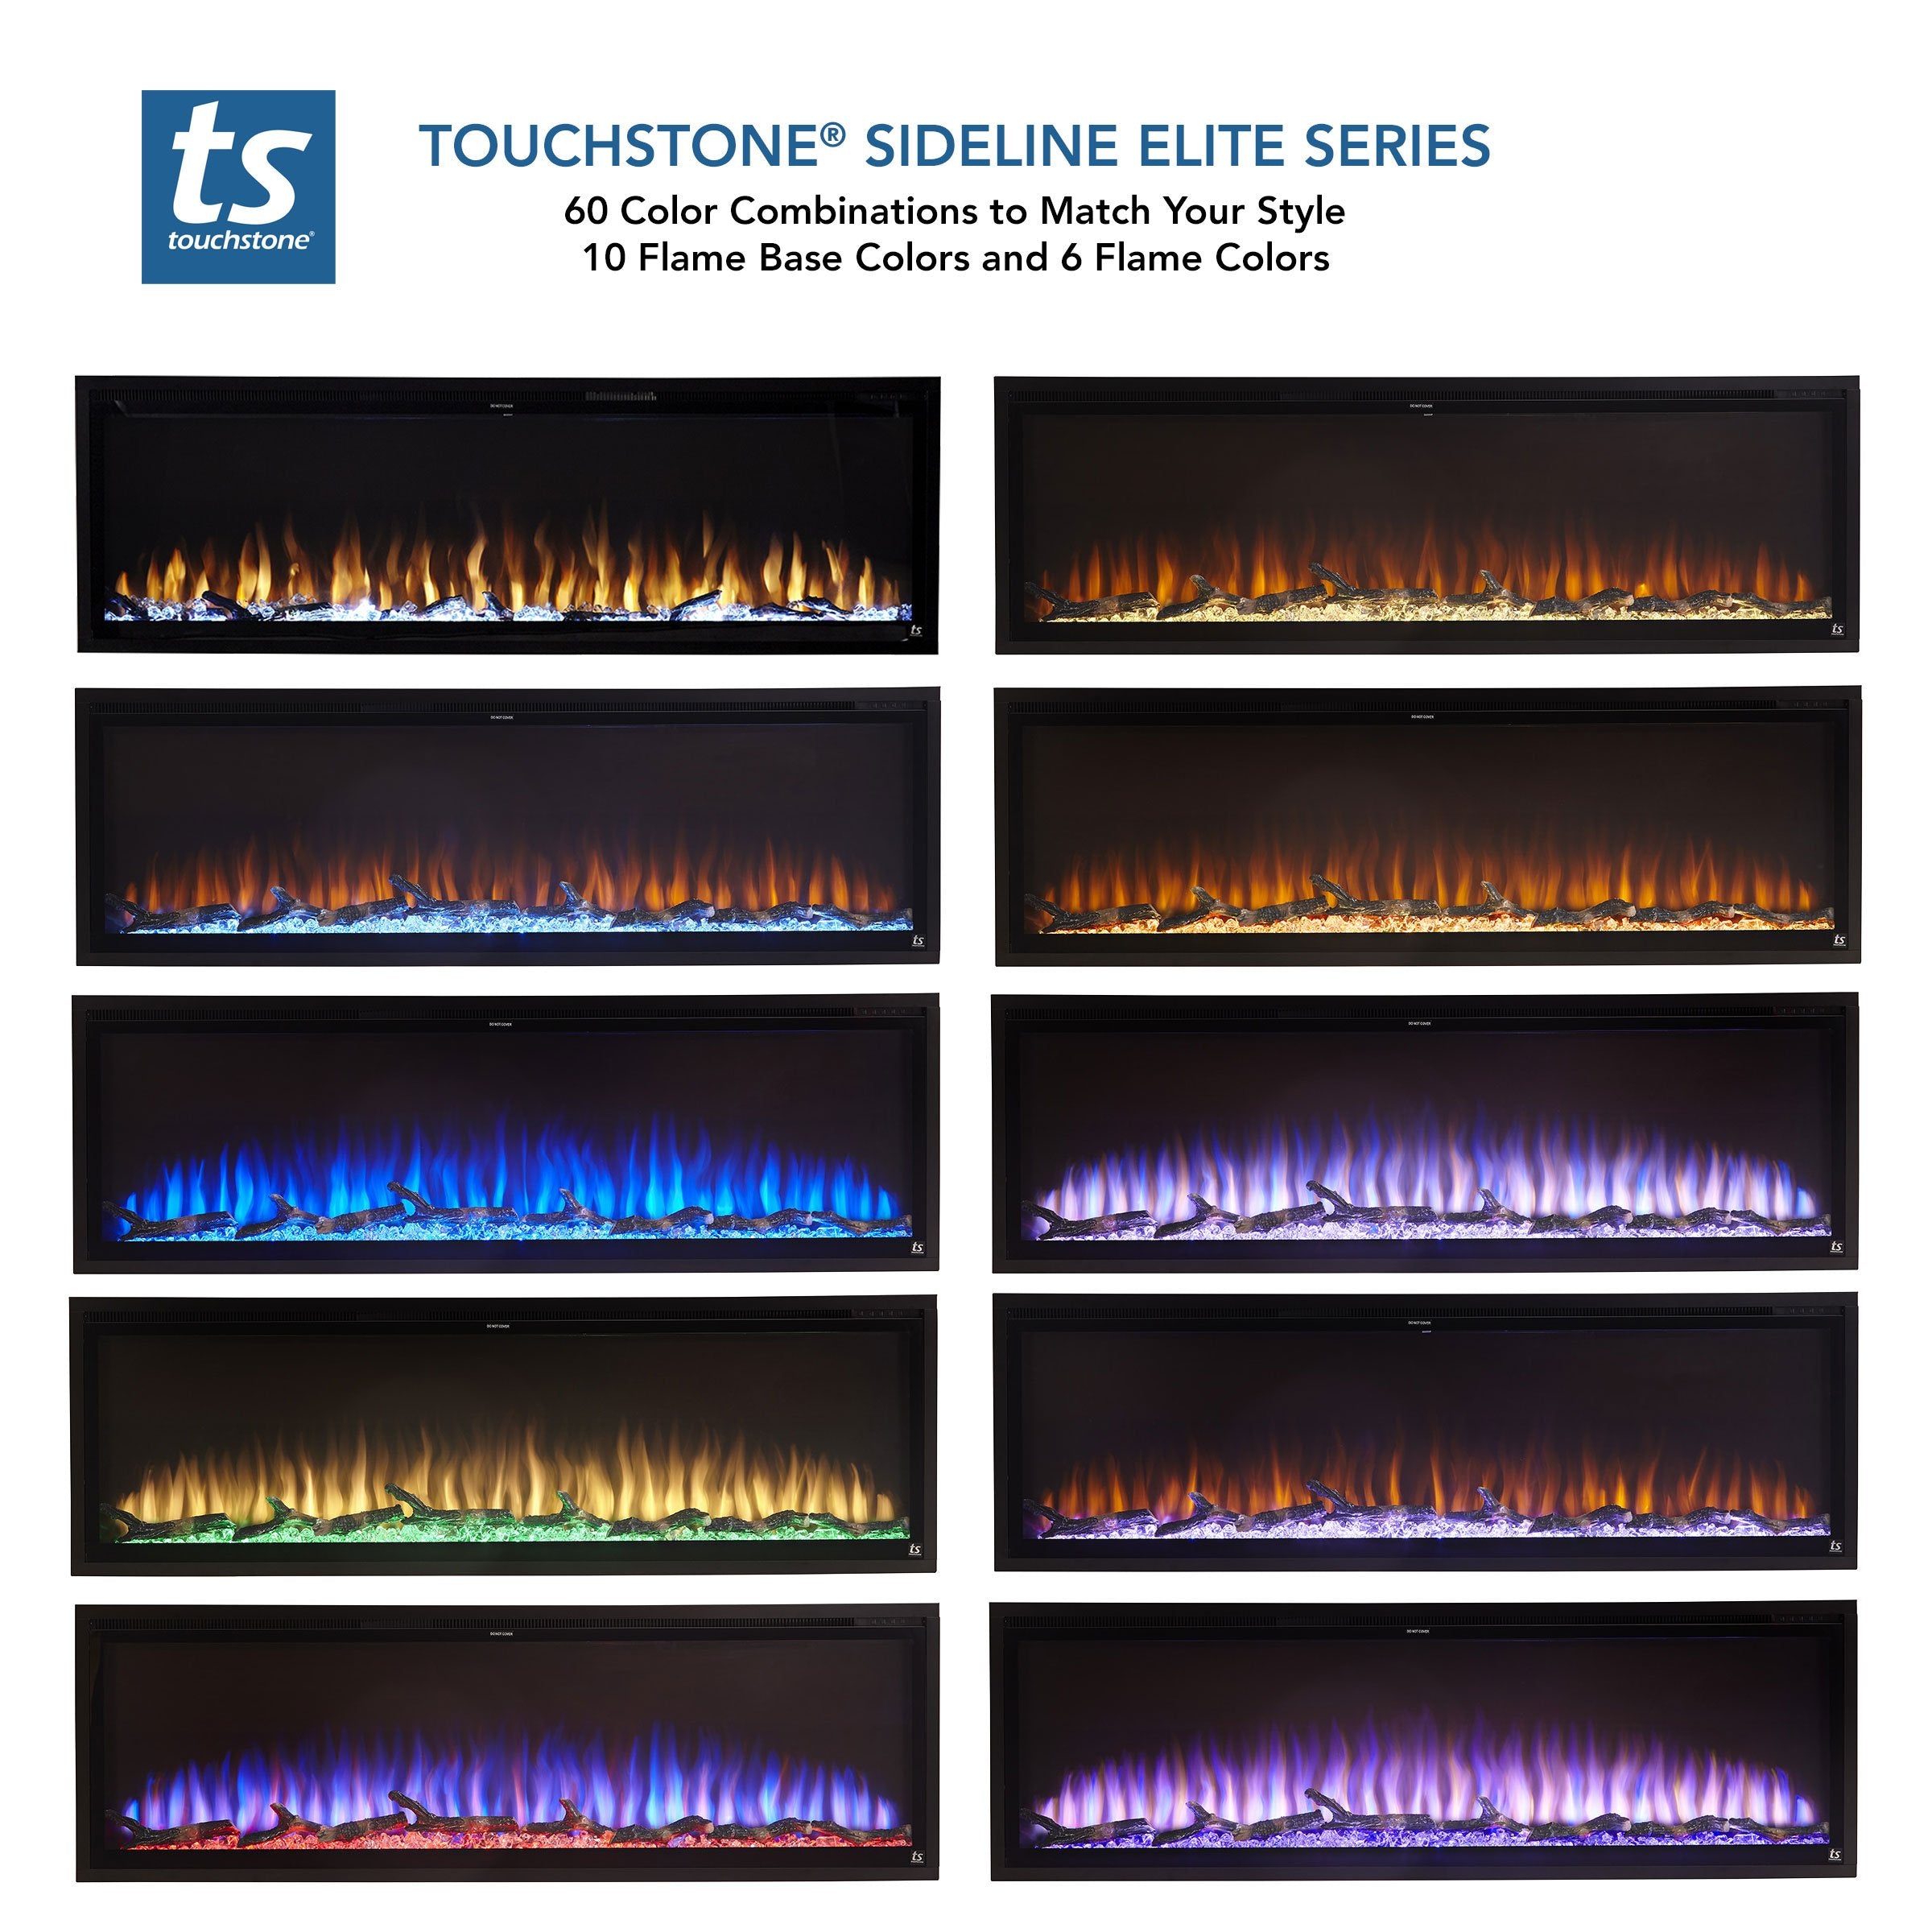 Touchstone Sideline Elite Electric Fireplace 60 color combinations